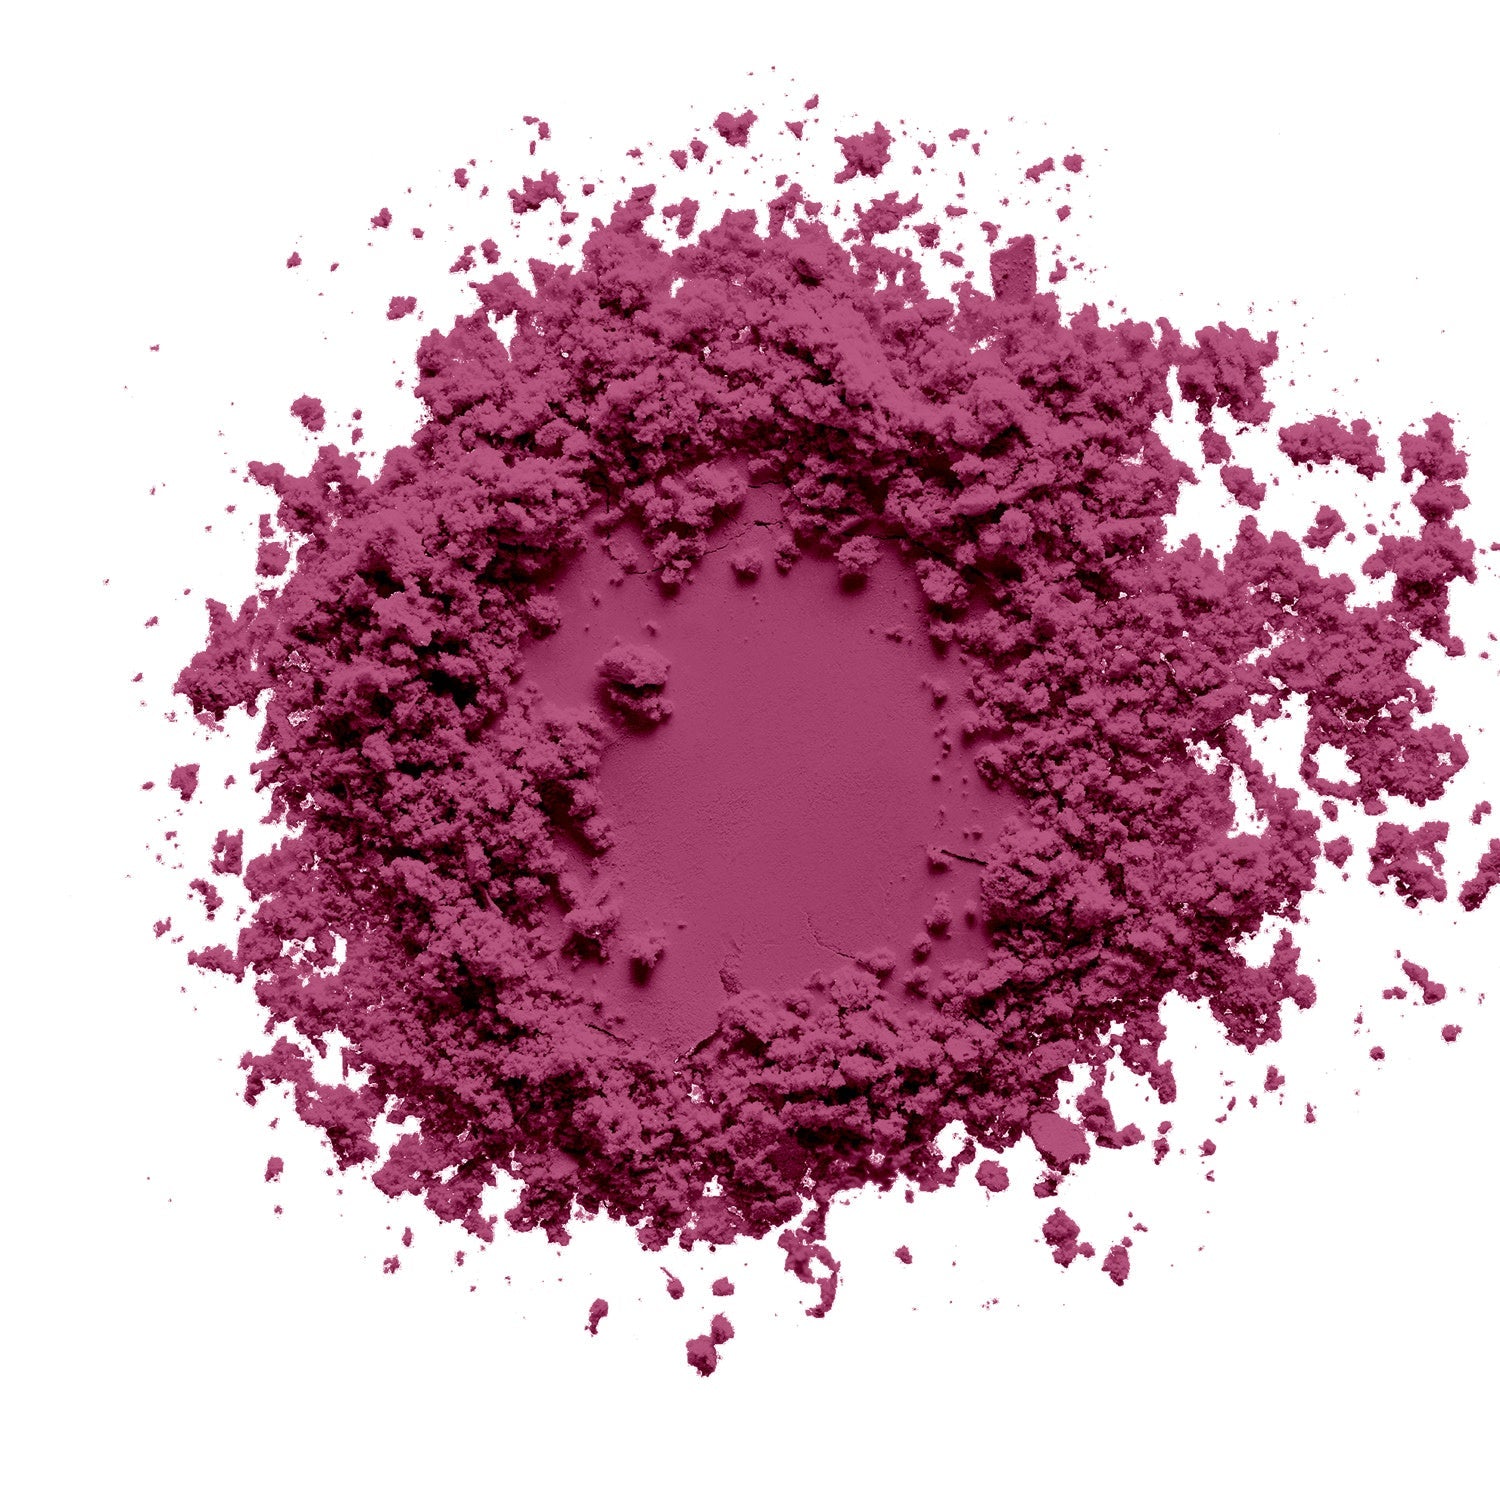 a swatch of radical violet tone of a vegan high quality pigmented talc free blush on a white canvas